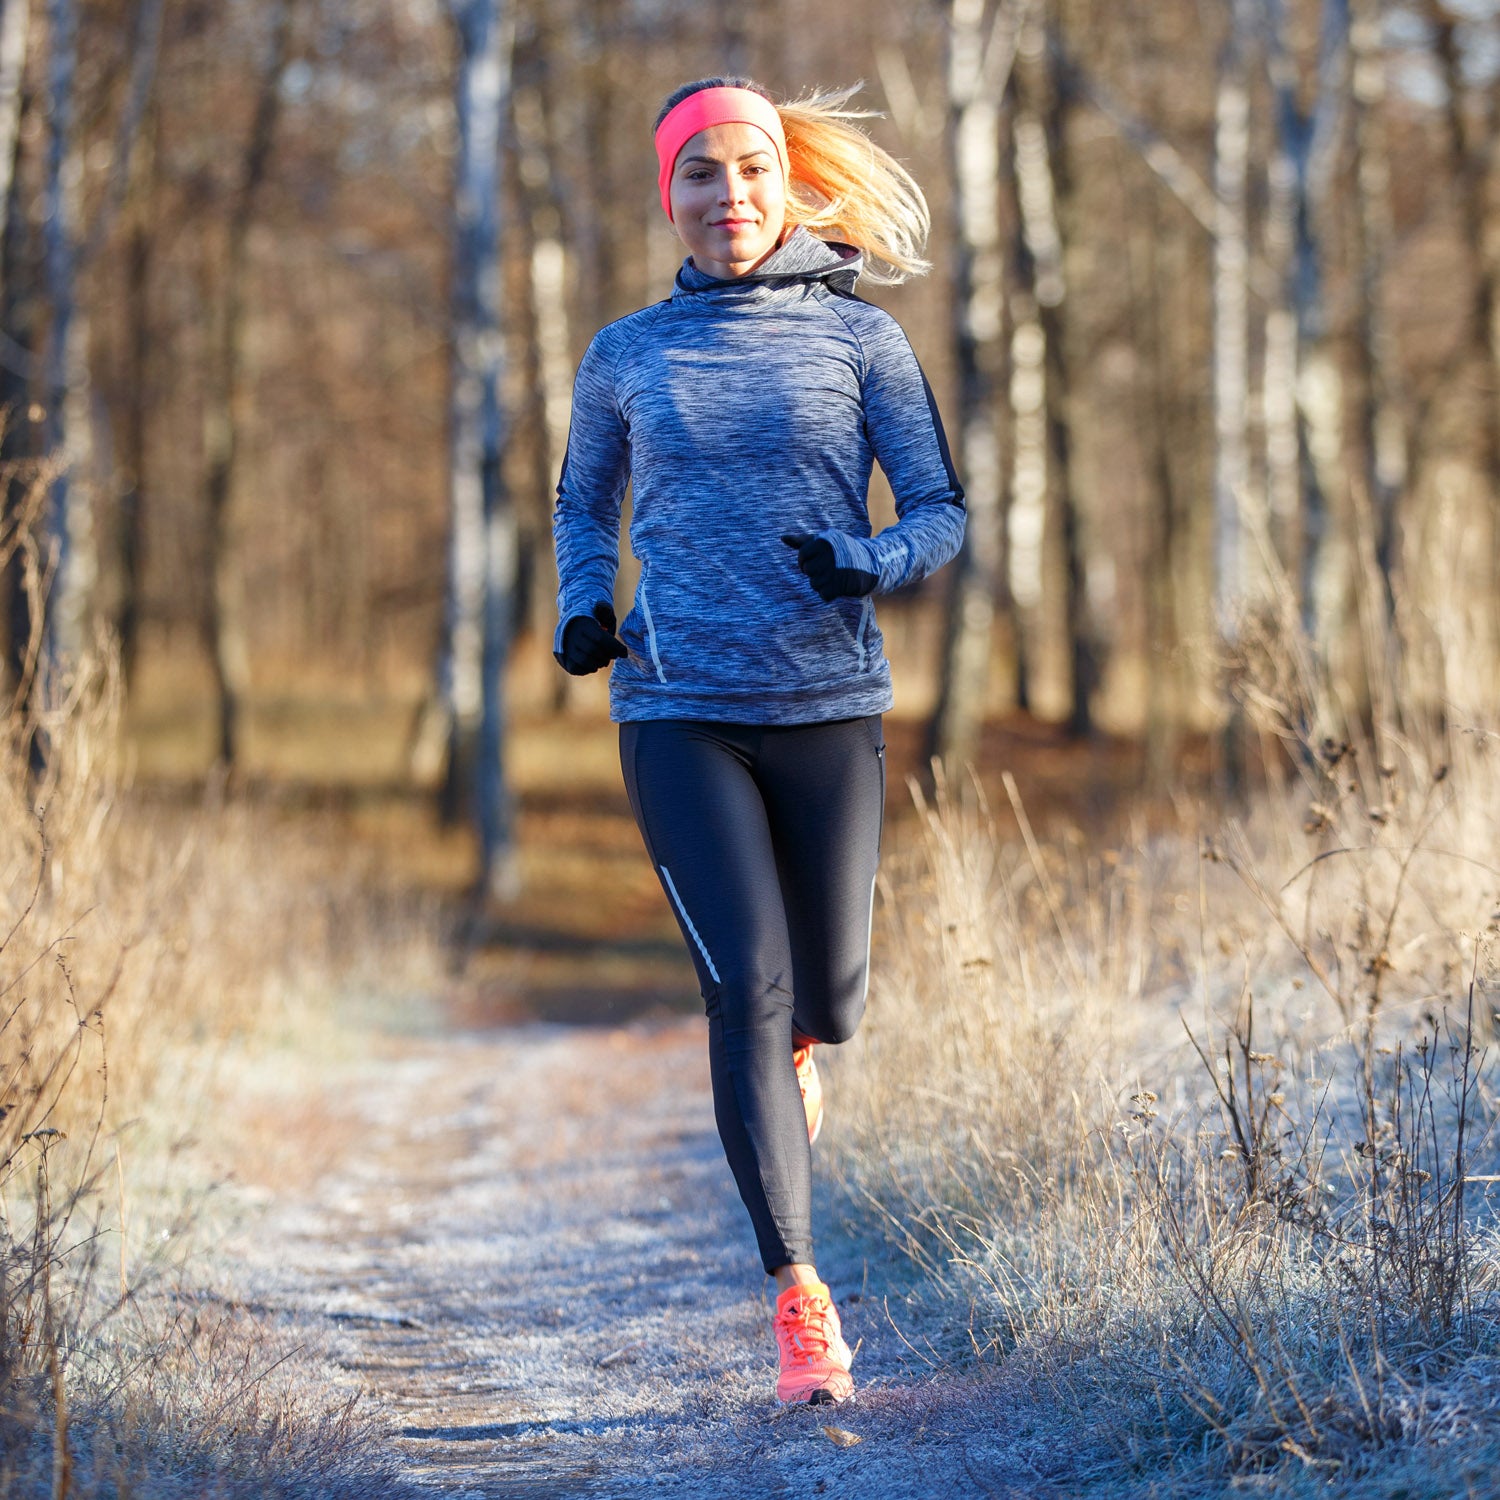 5 Types Of Winter Gear To Help You Train In The Cold – Built for